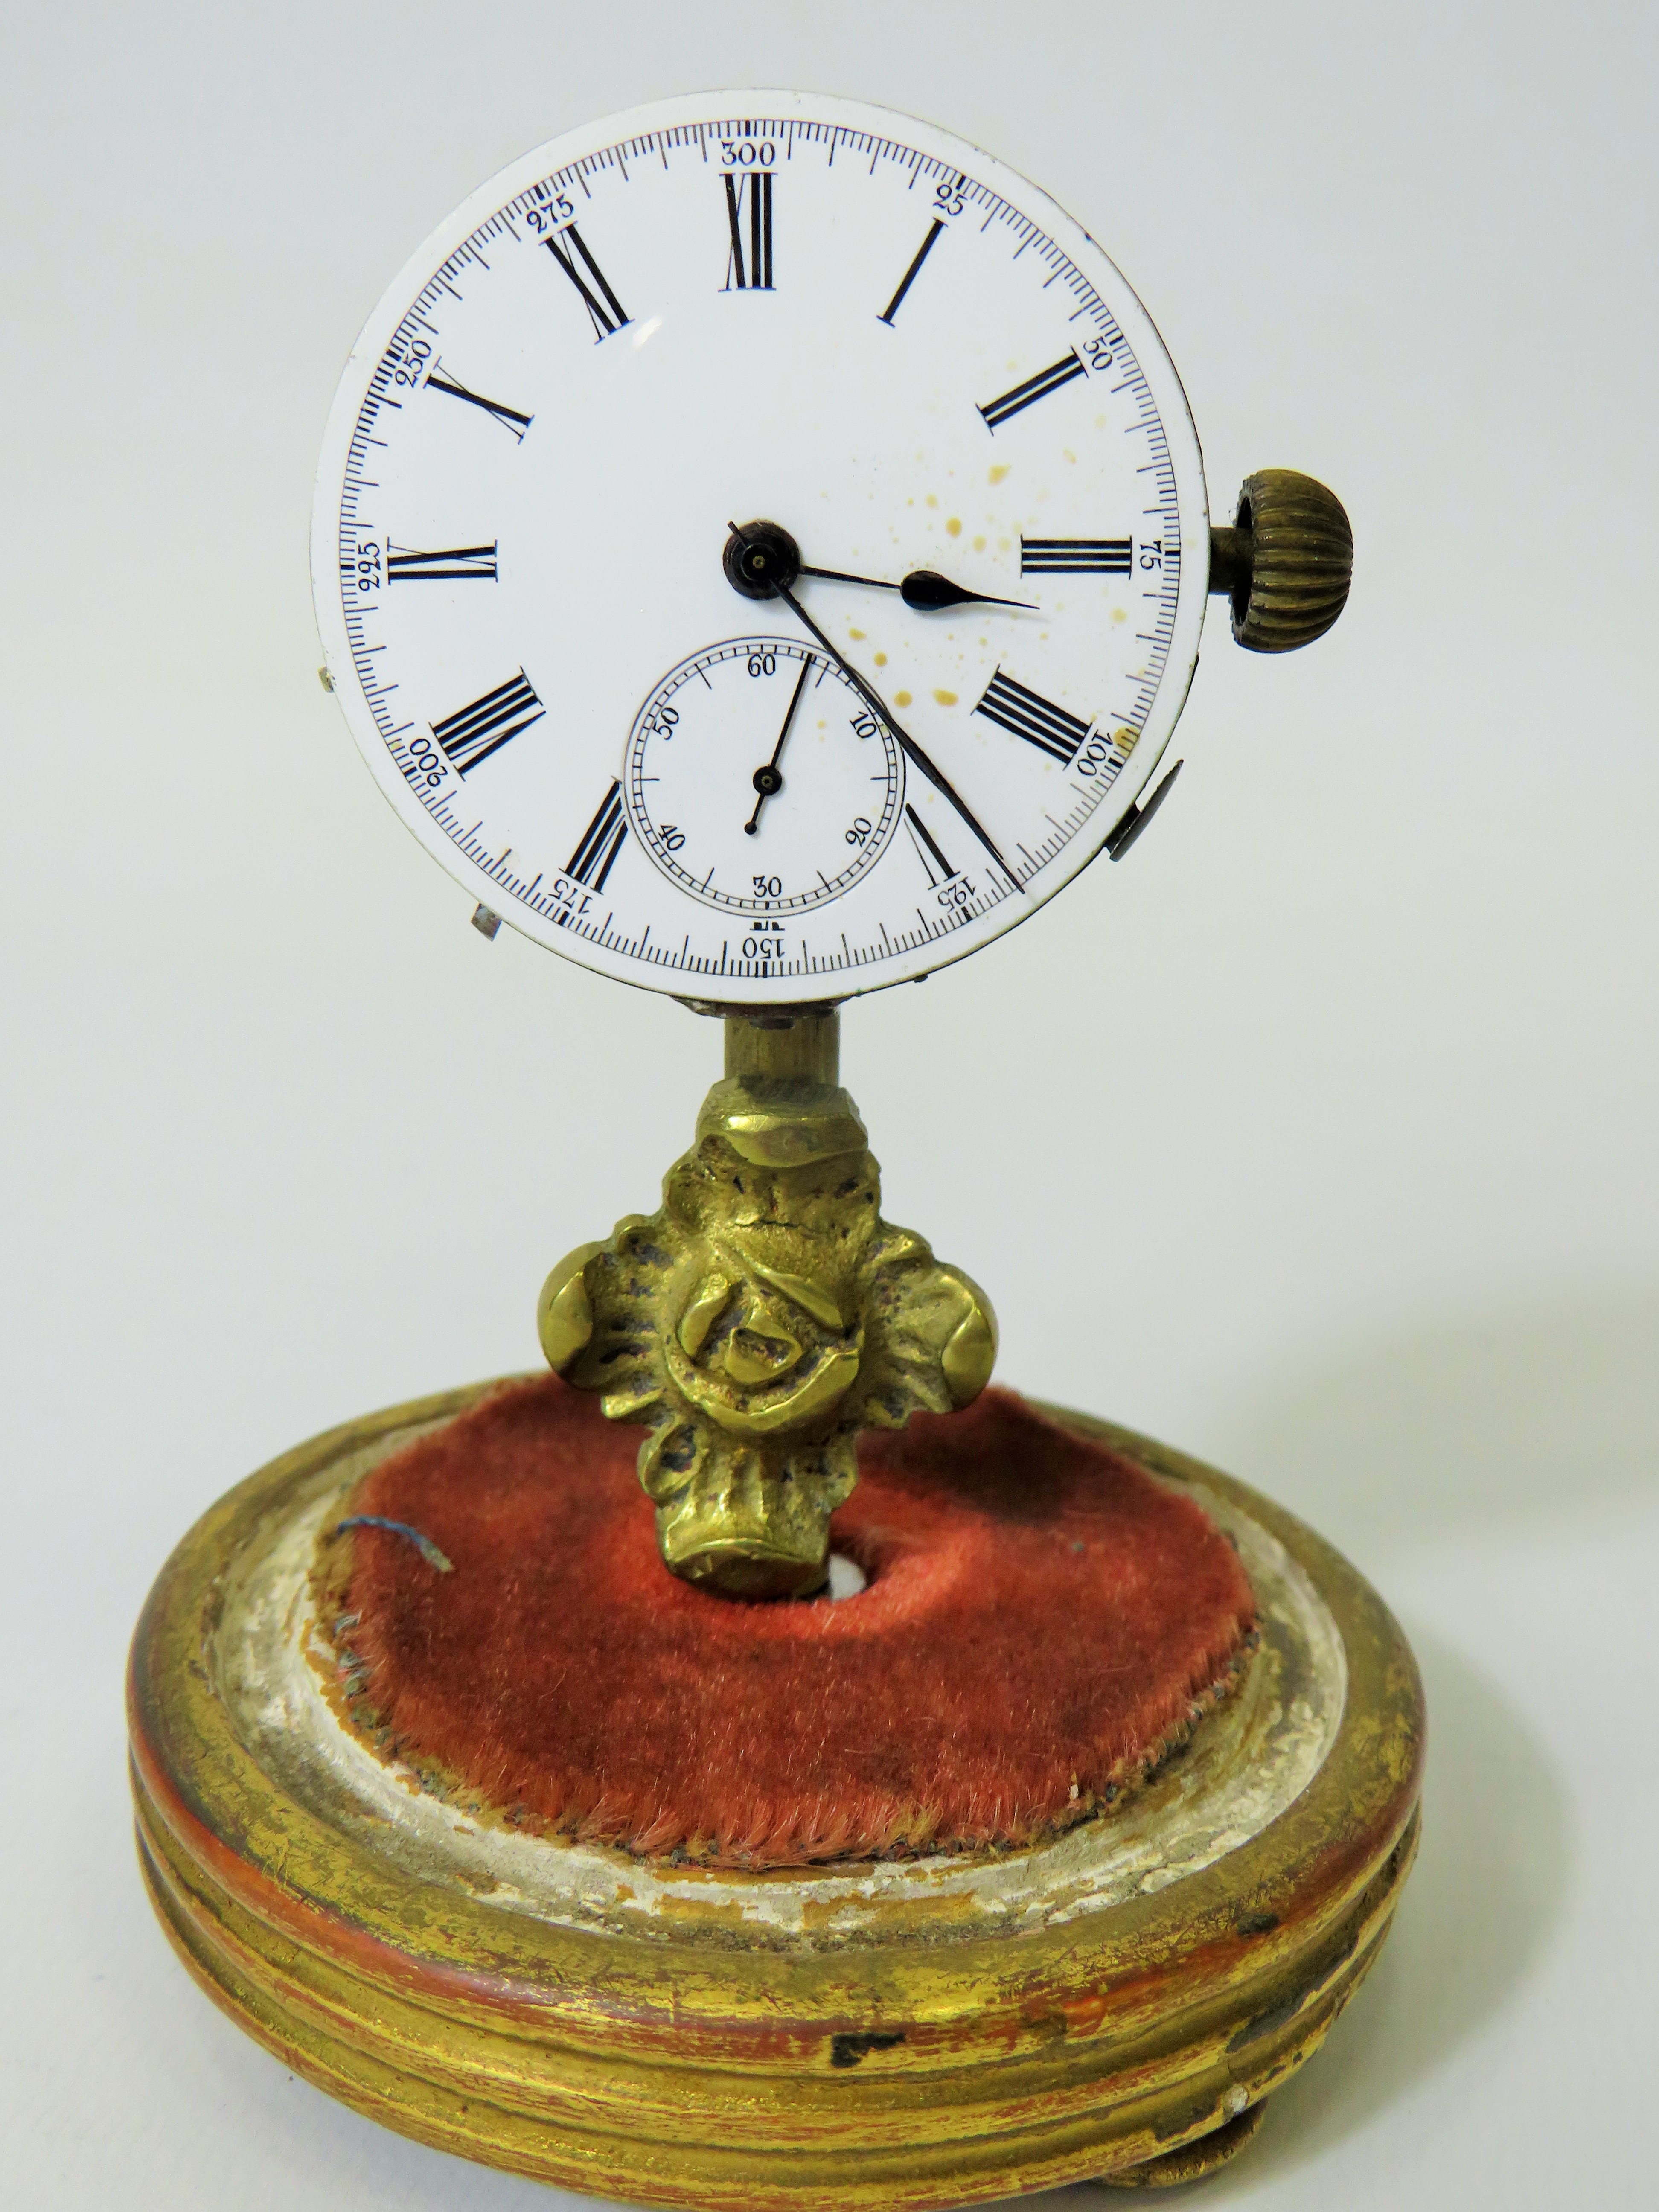 Unusual enamel faced Pocket watch which has been mounted on a brass and wooden stand and under a gla - Image 2 of 4